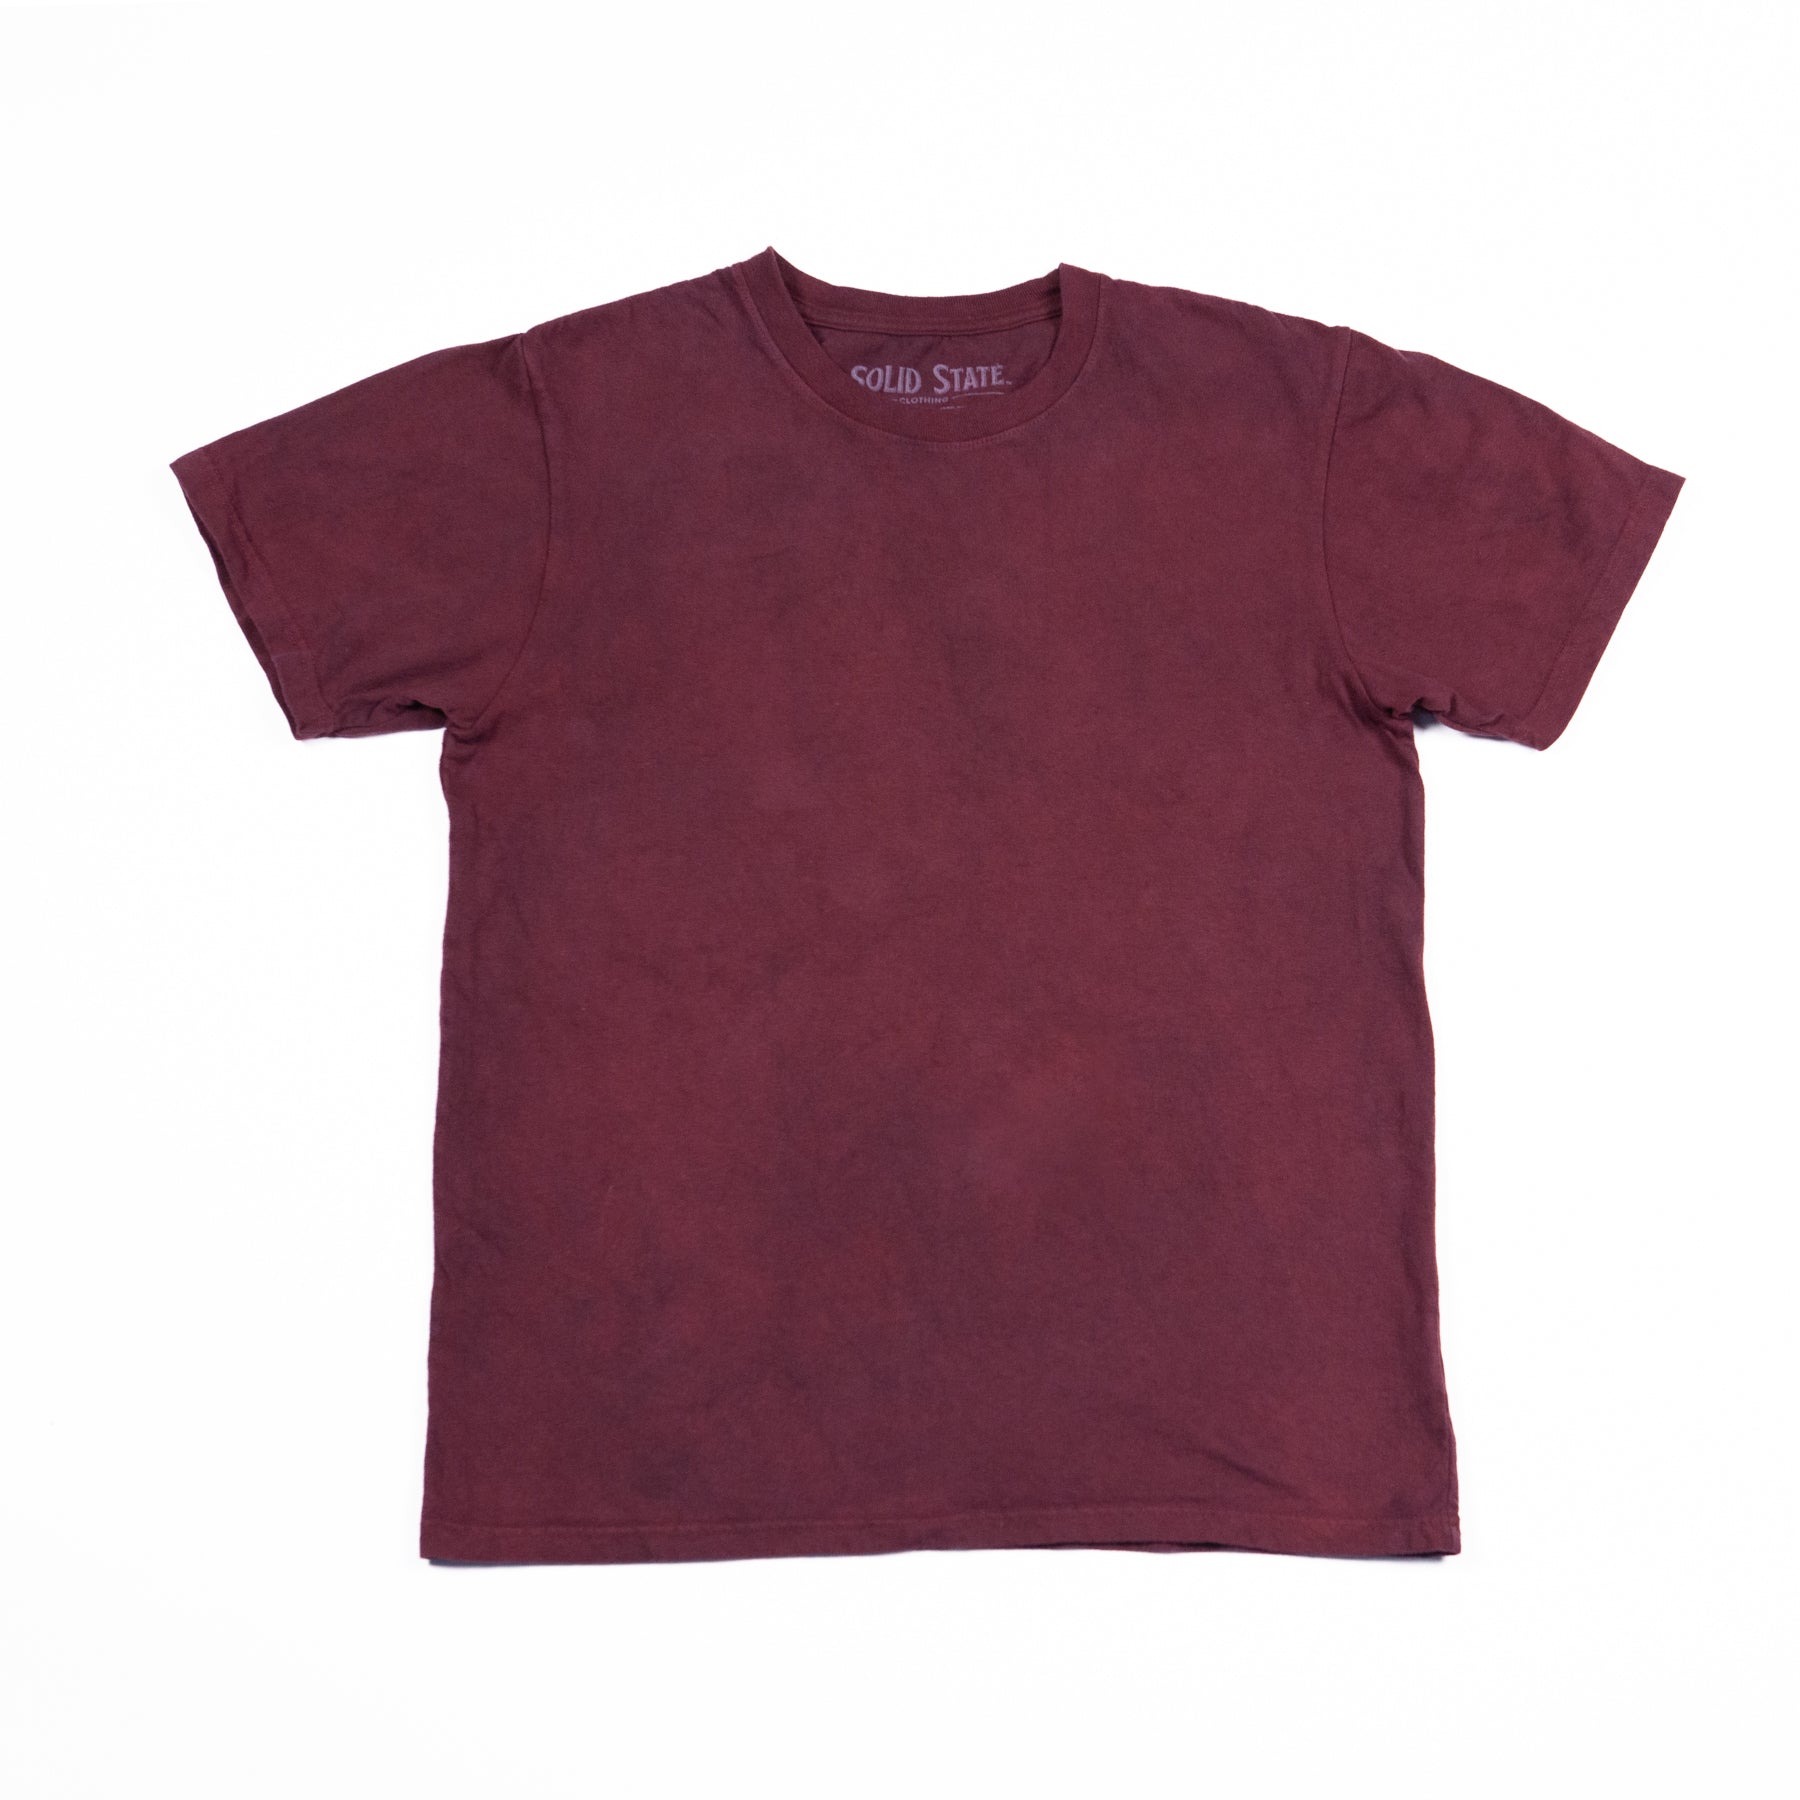 A crewneck t-shirt made in the USA and dyed with madder root standing laying flat on a white background